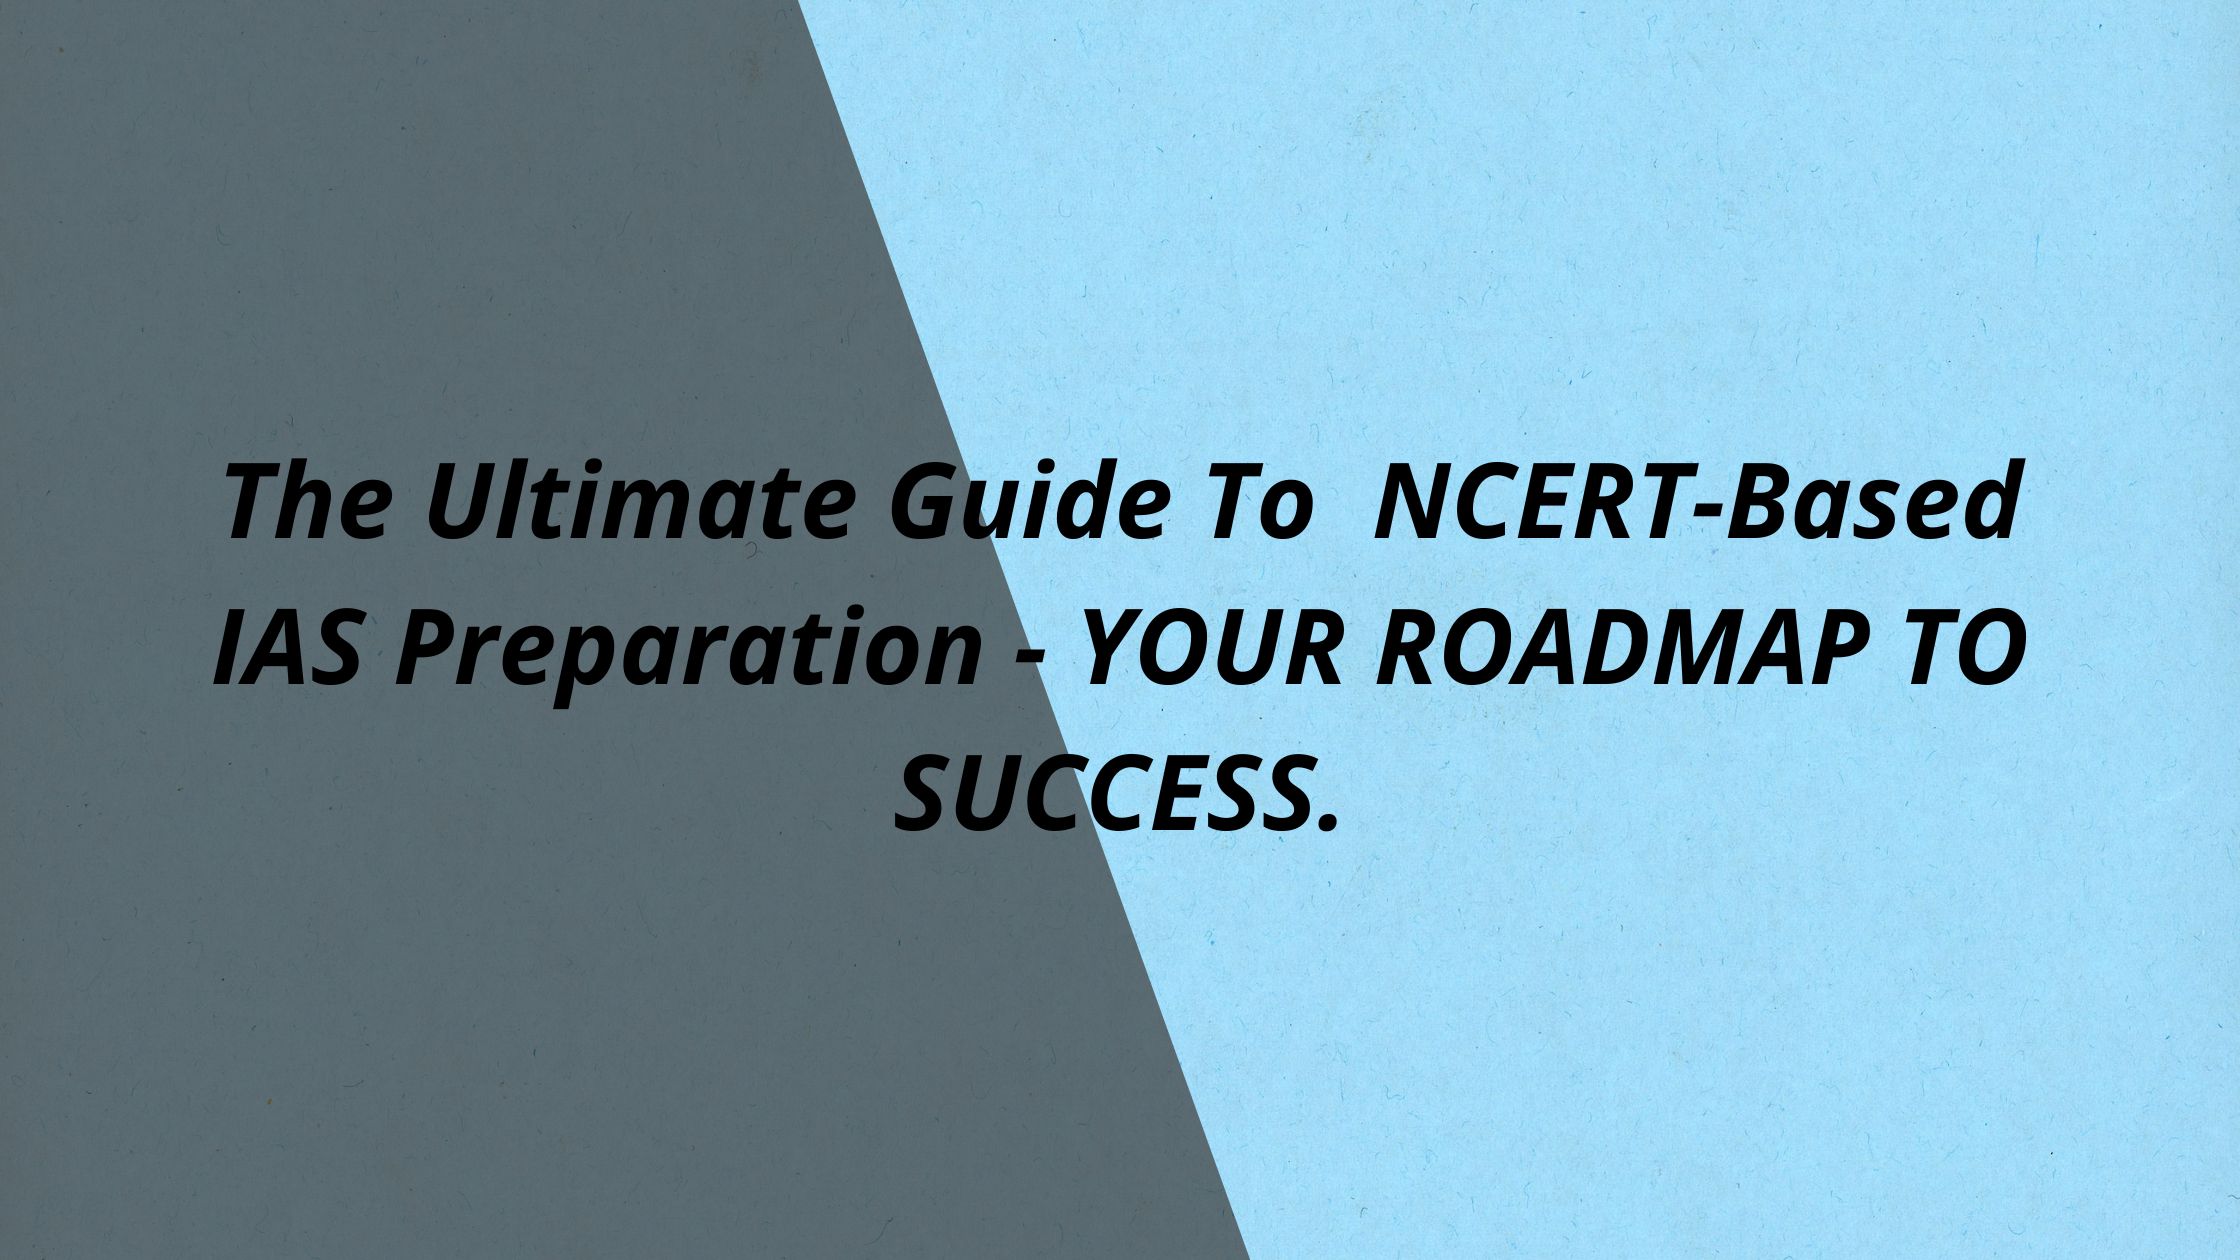 img-The Ultimate Guide To NCERT-Based IAS Preparation - YOUR ROADMAP TO SUCCESS.